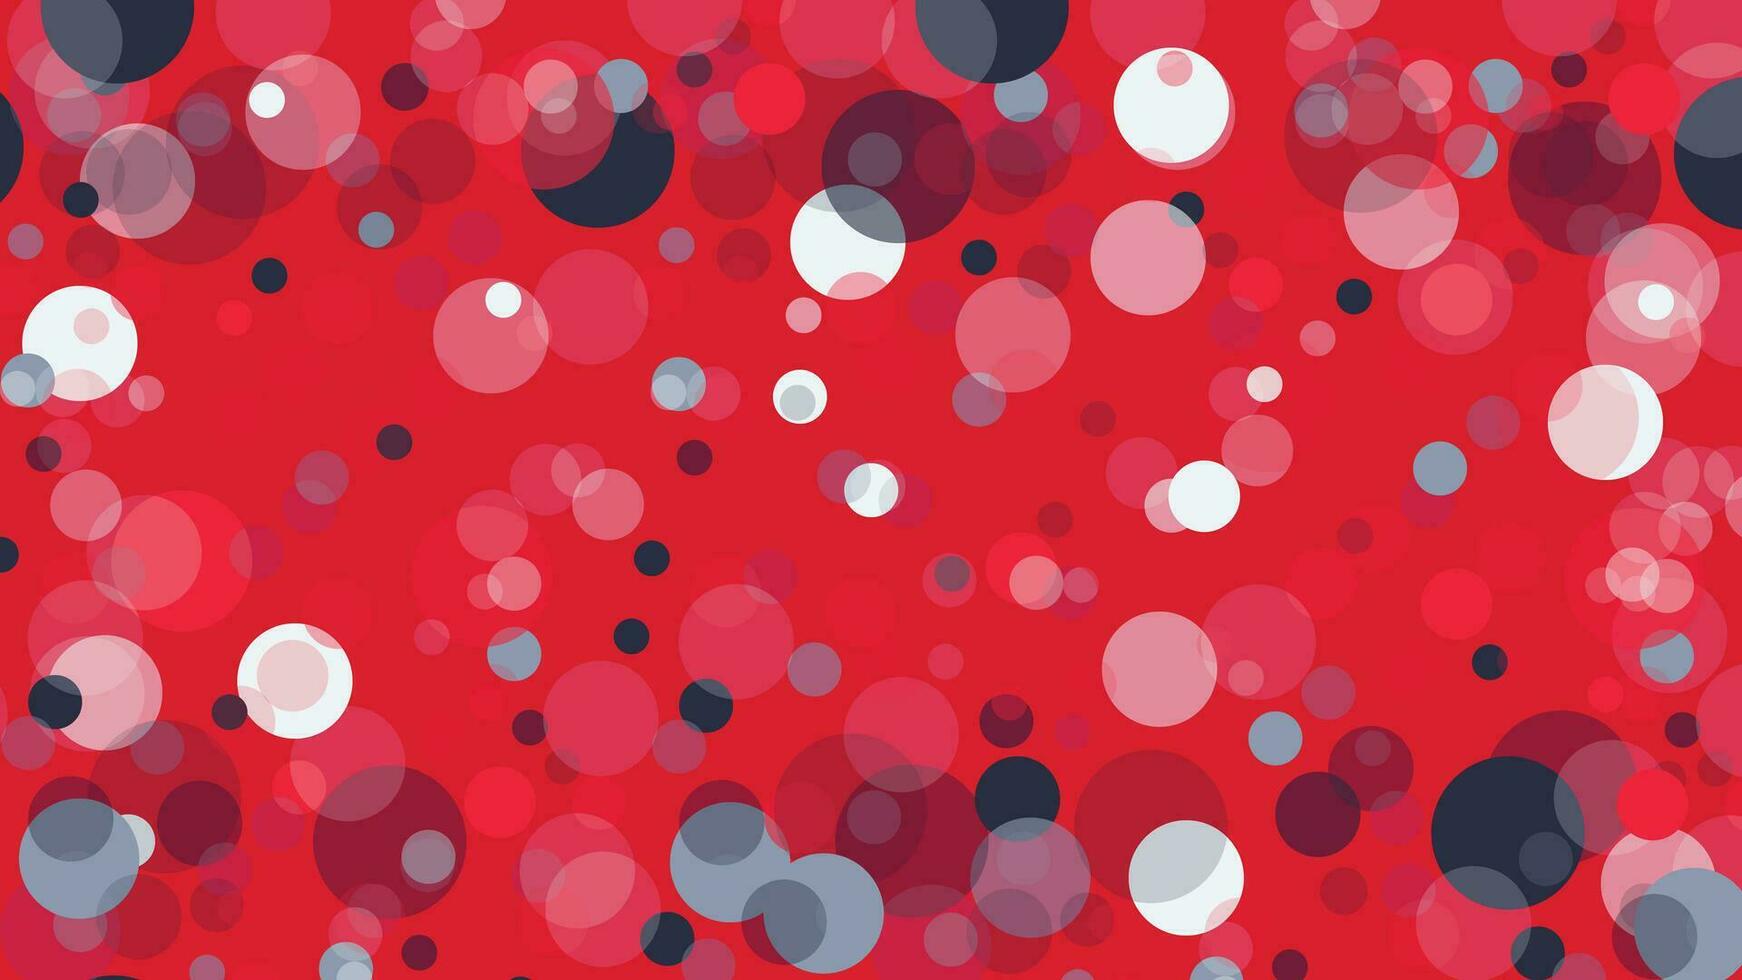 Abstract polka dot background in red and white combination color. vector